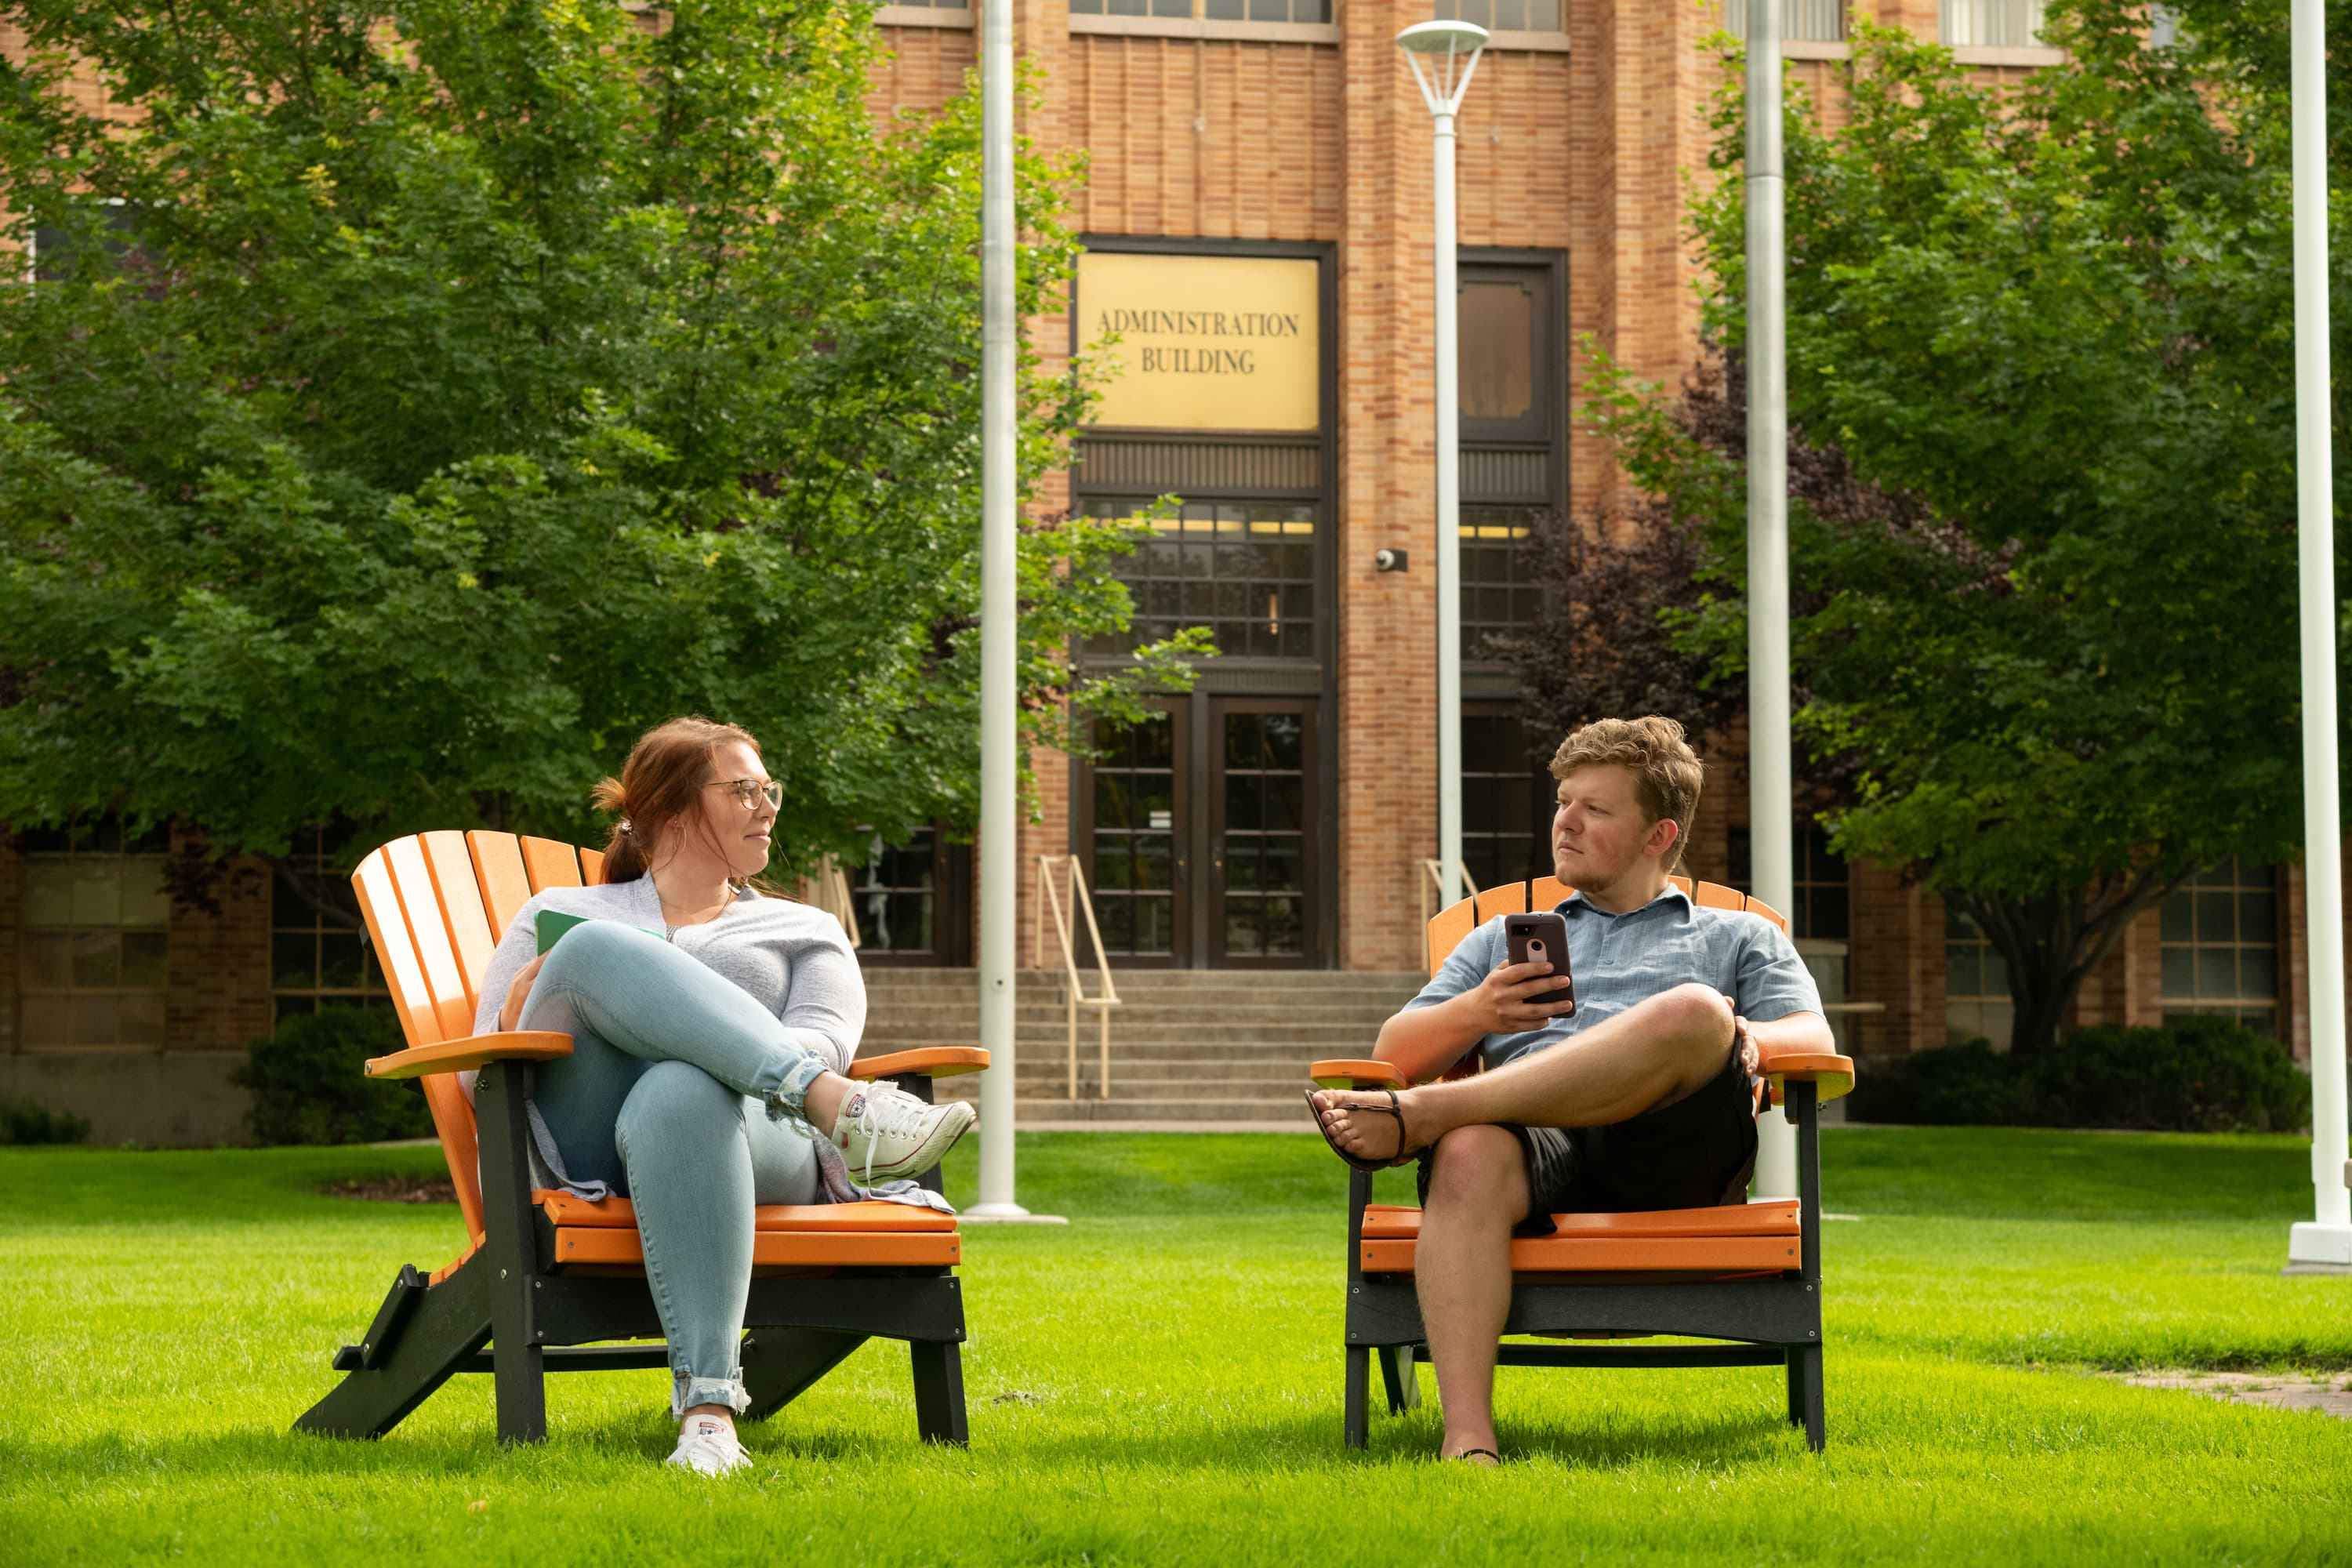 Students talking in lawn chairs on the quad in front of the Administration Building.